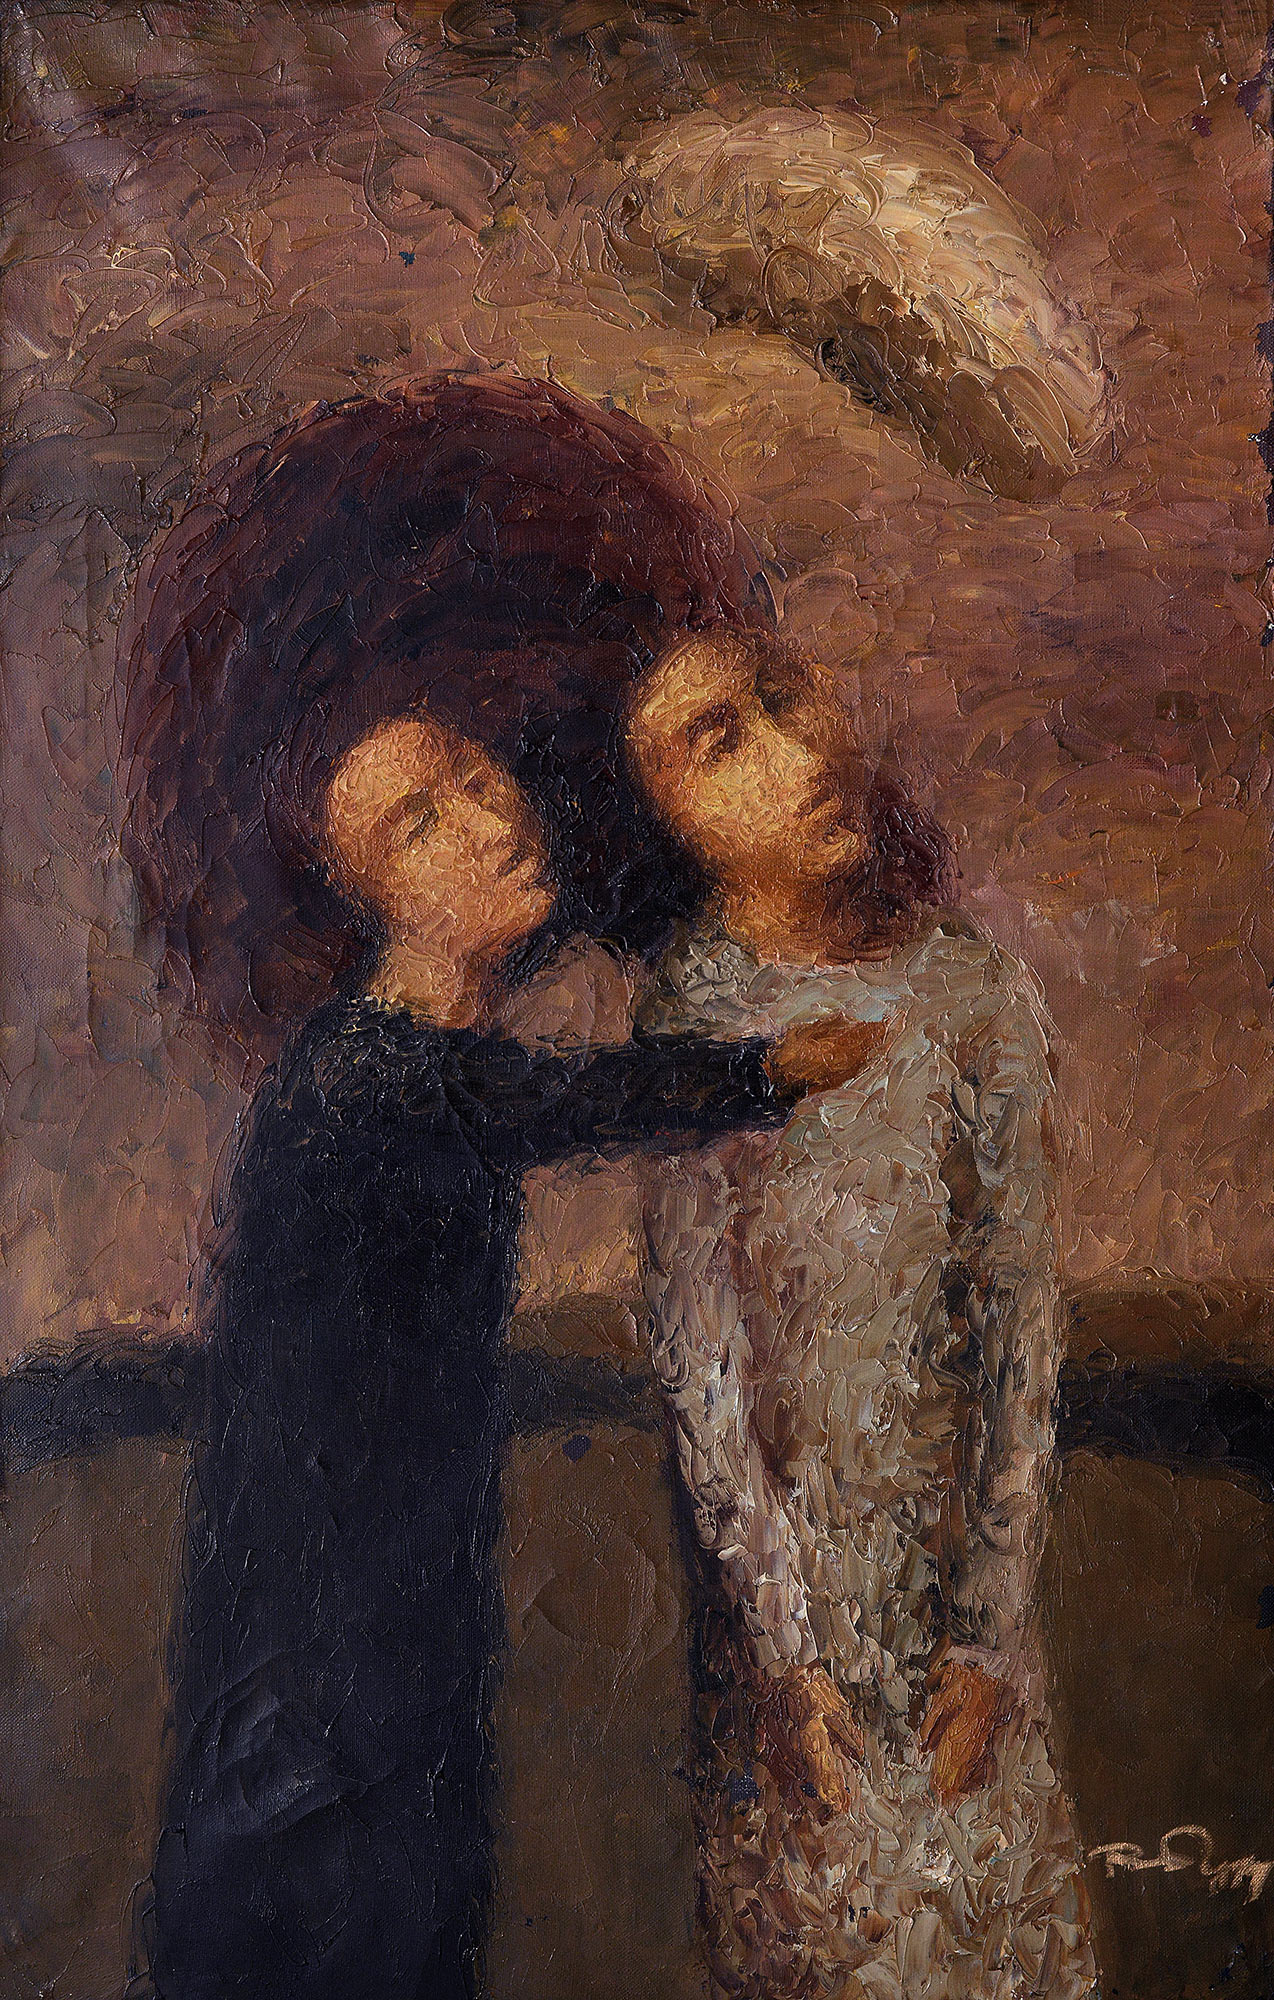 "Meeting", late 1980s